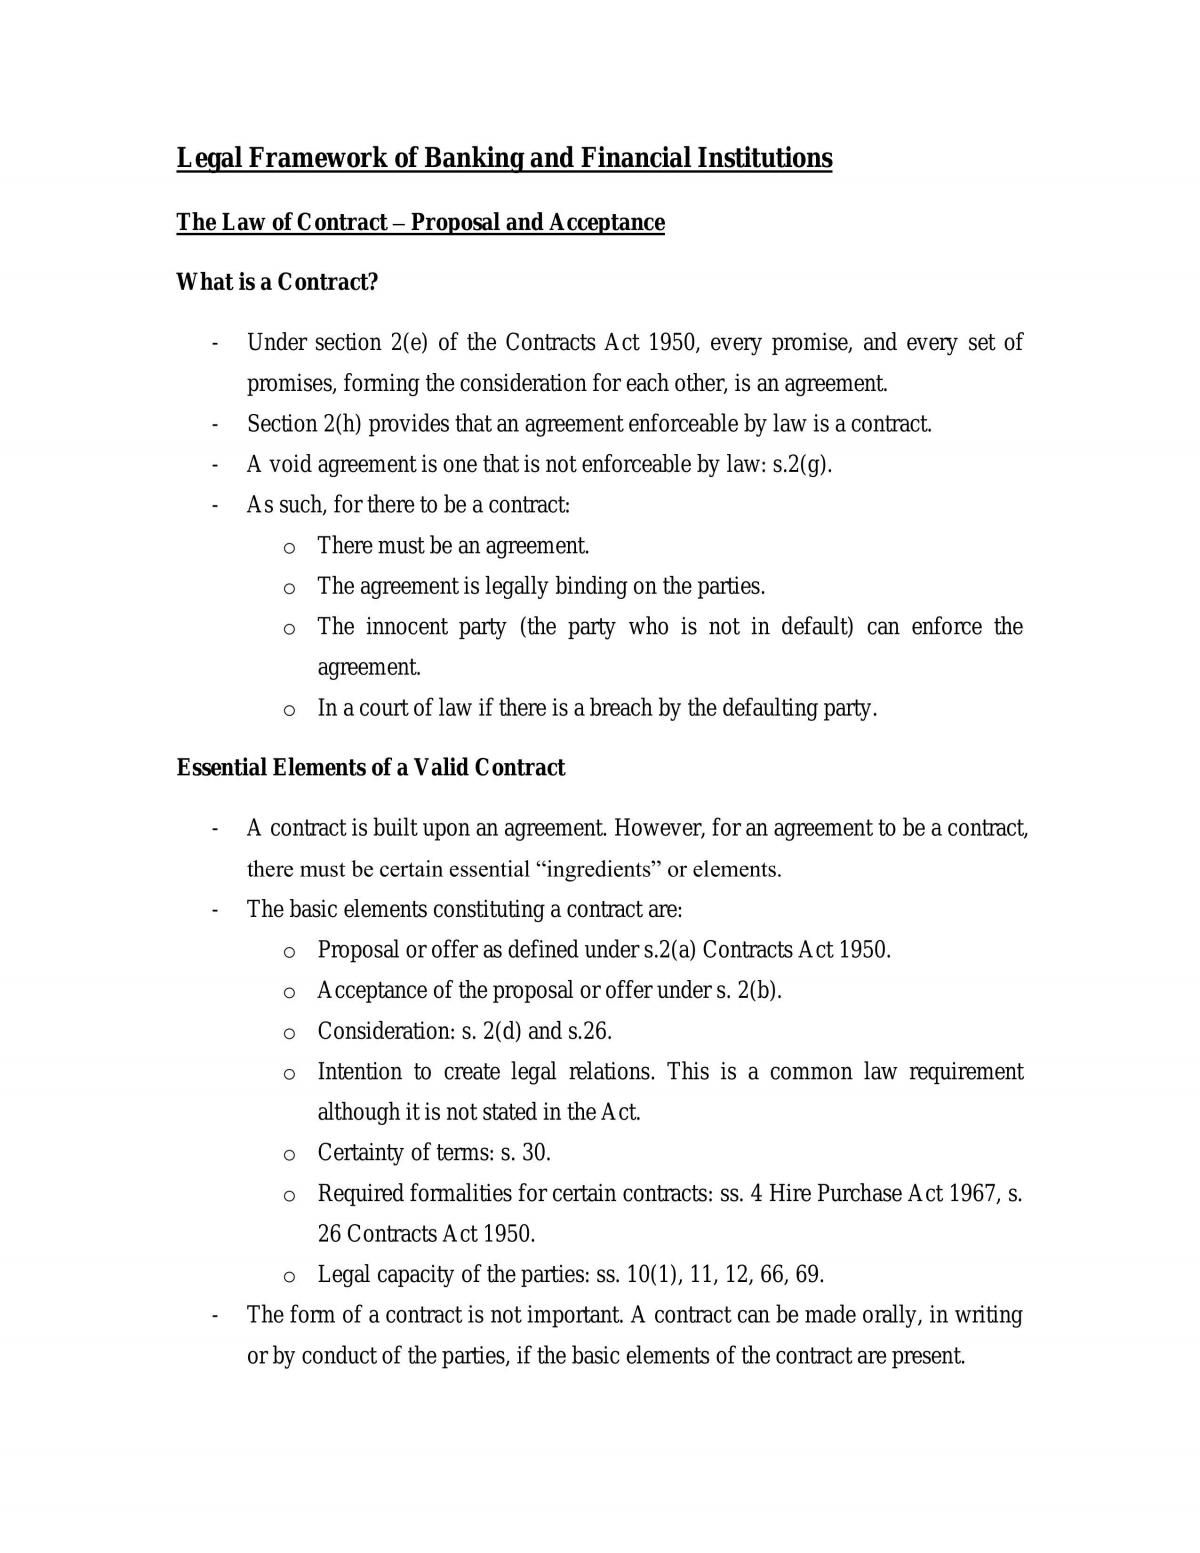 Legal Framework of Banking and Financial Institutions Notes - Page 1